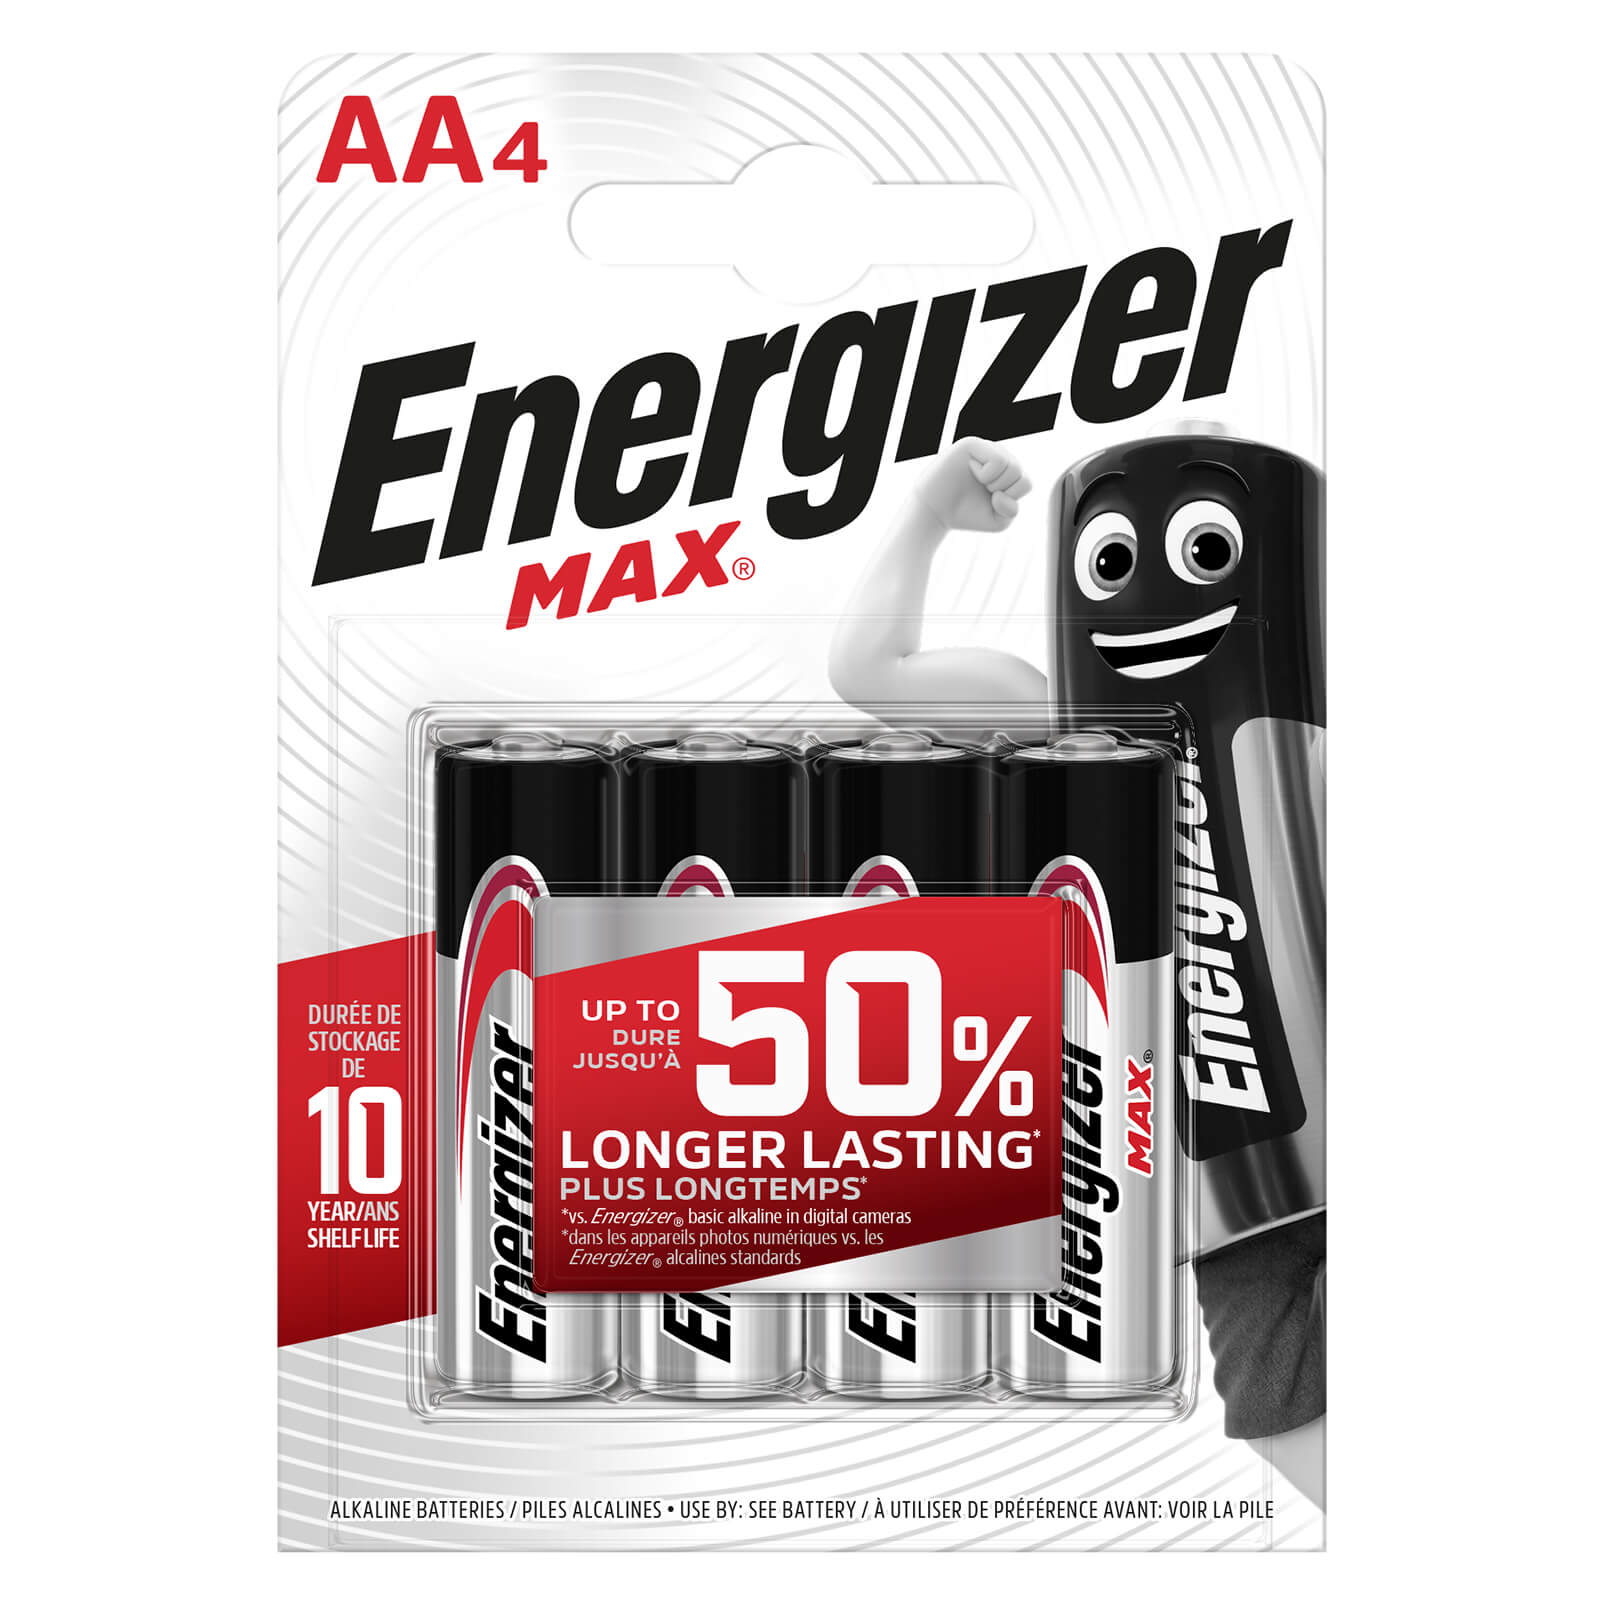 Photo of Energizer Max Alkaline Aa Batteries - 4 Pack